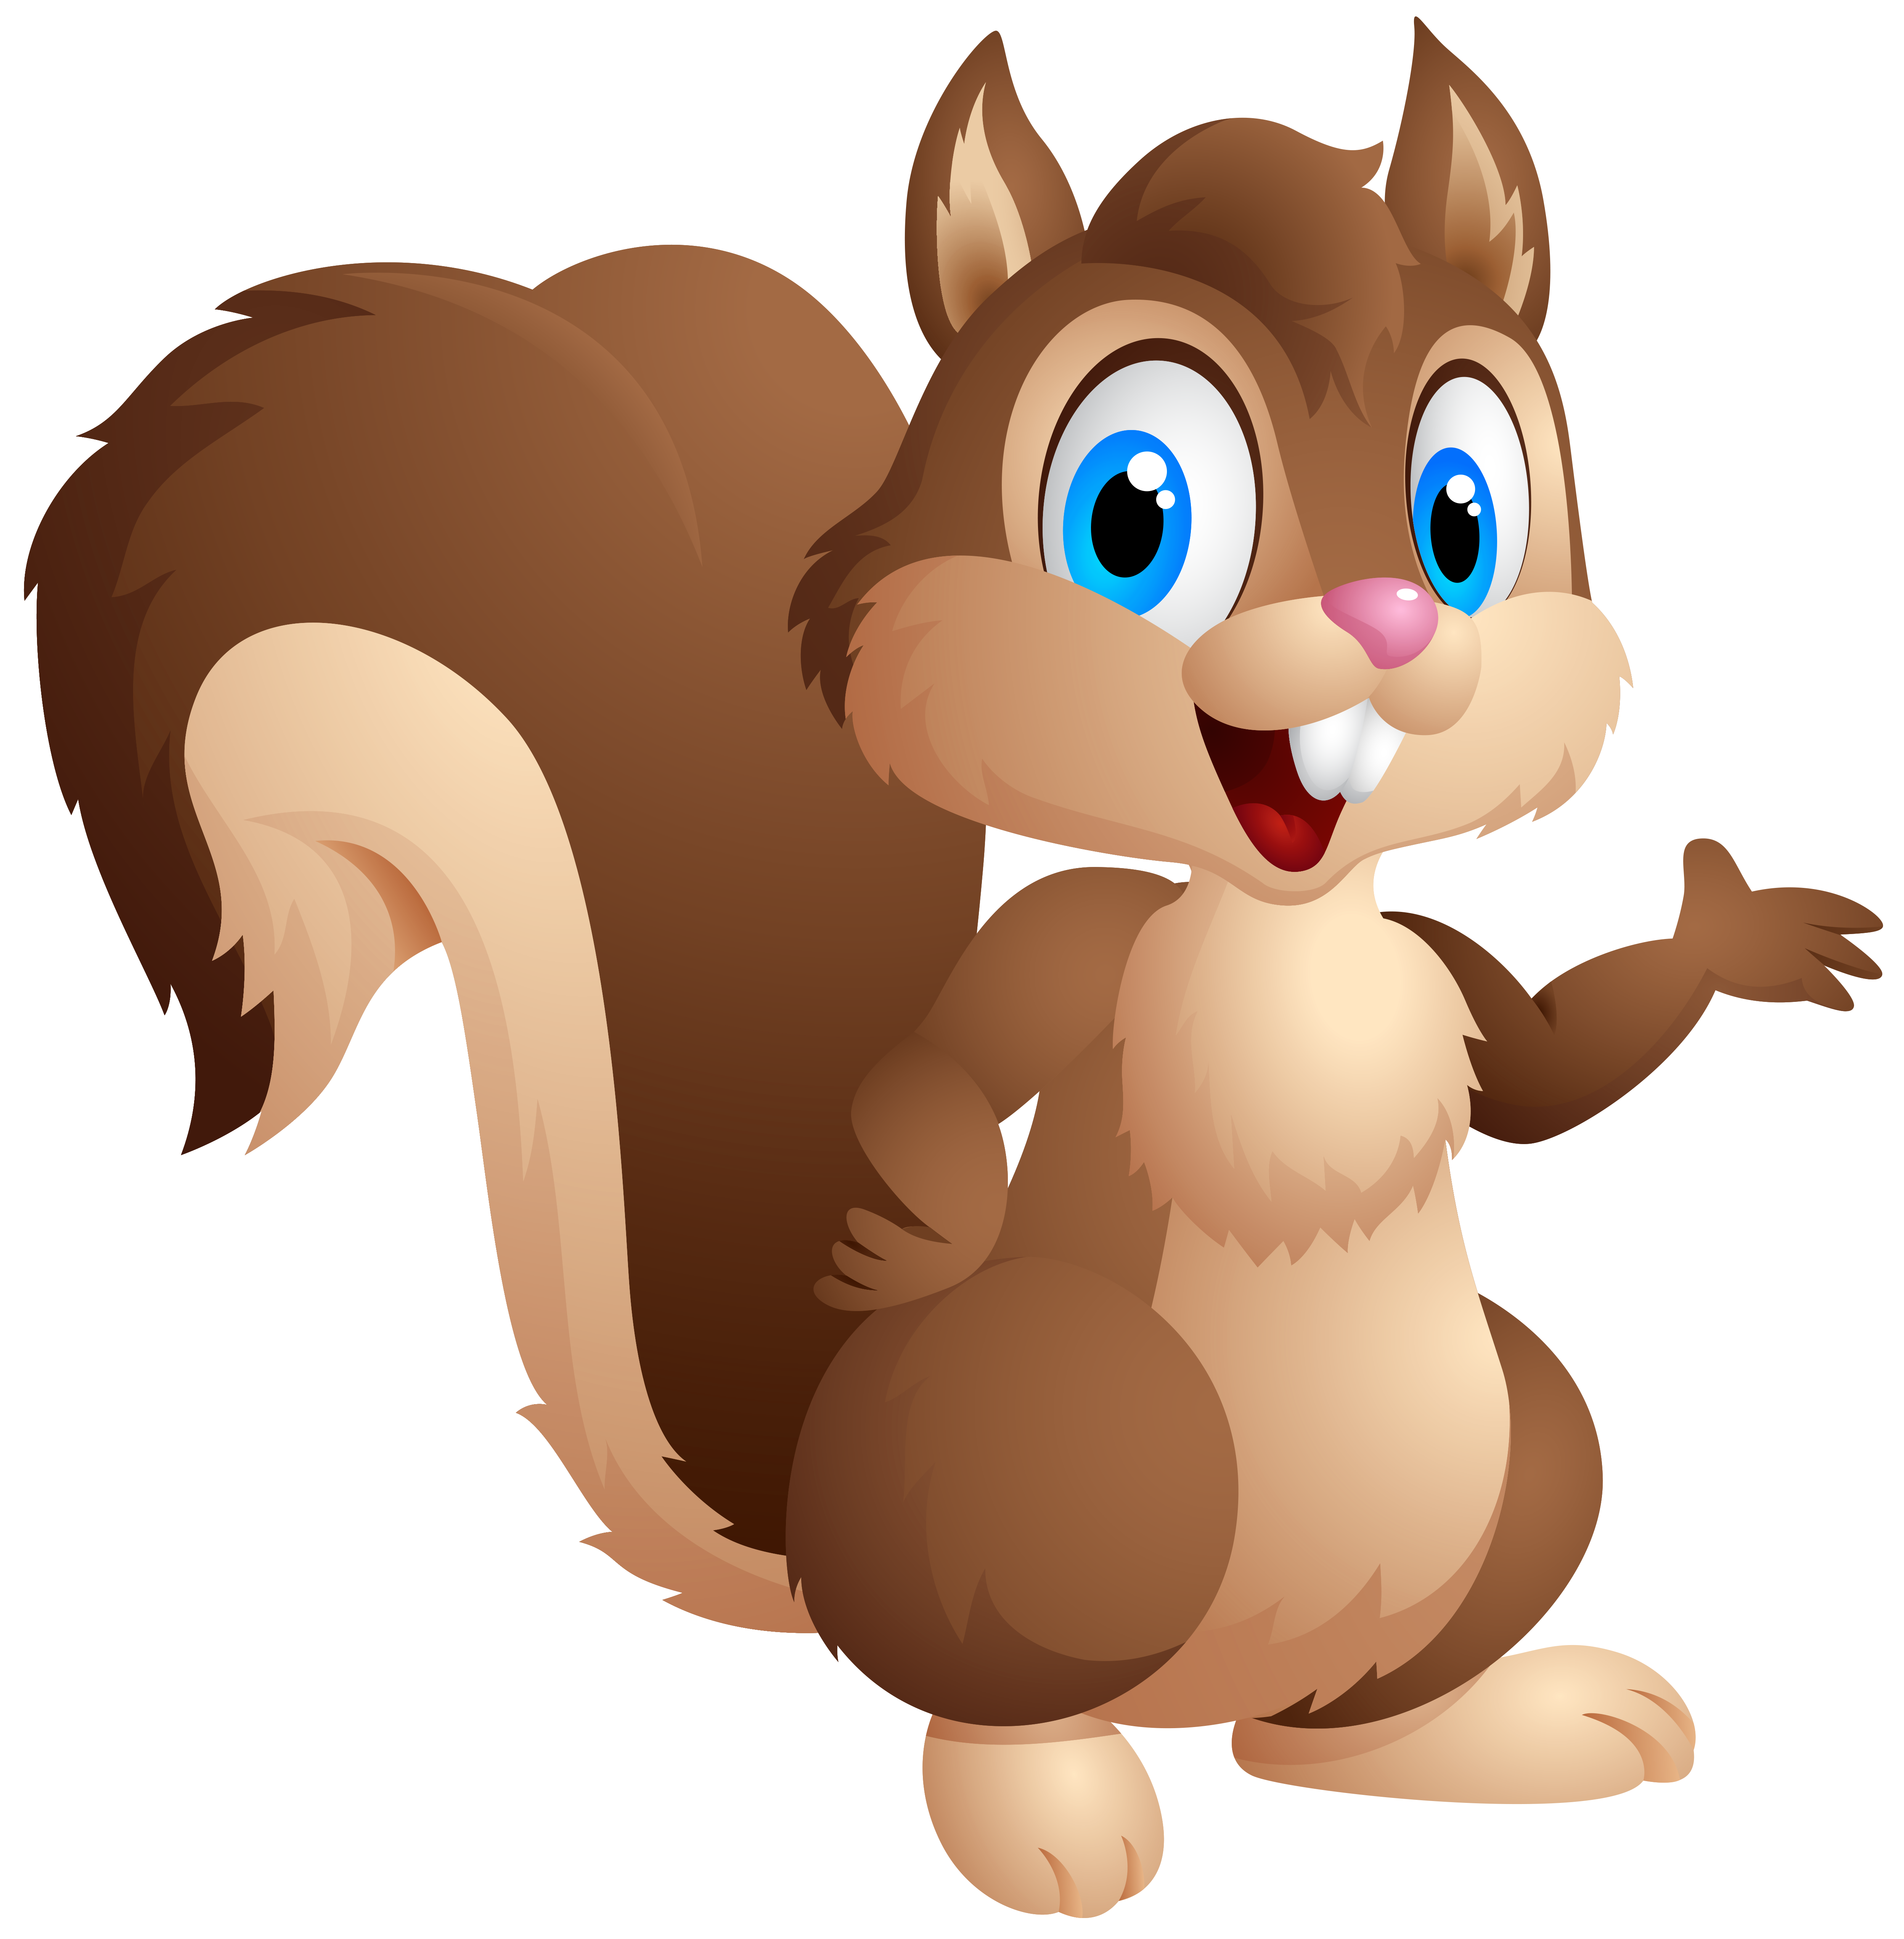 Cute Squirrel Cartoon PNG Clipart Image​ | Gallery Yopriceville -  High-Quality Free Images and Transparent PNG Clipart